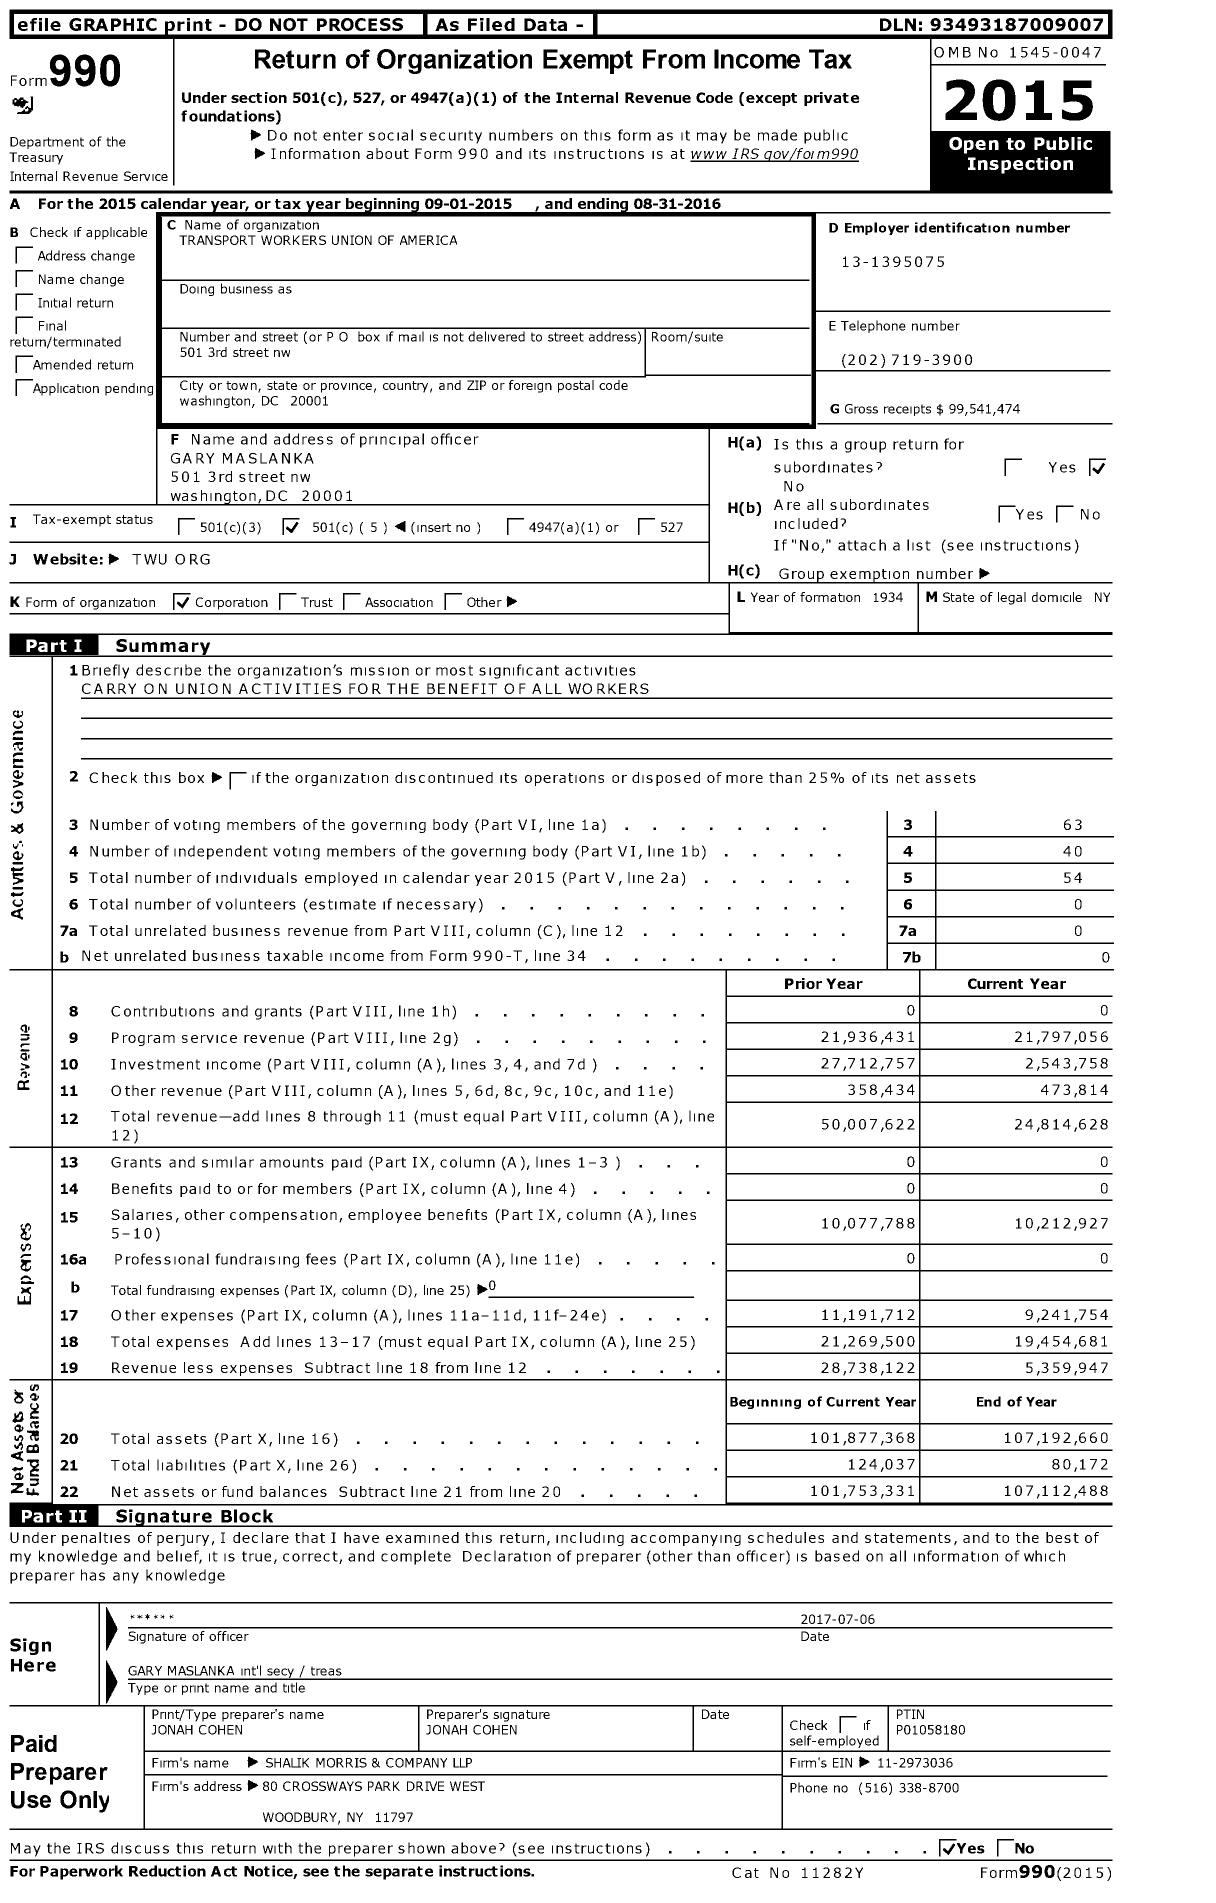 Image of first page of 2015 Form 990O for Transport Workers Union of America (TWU)